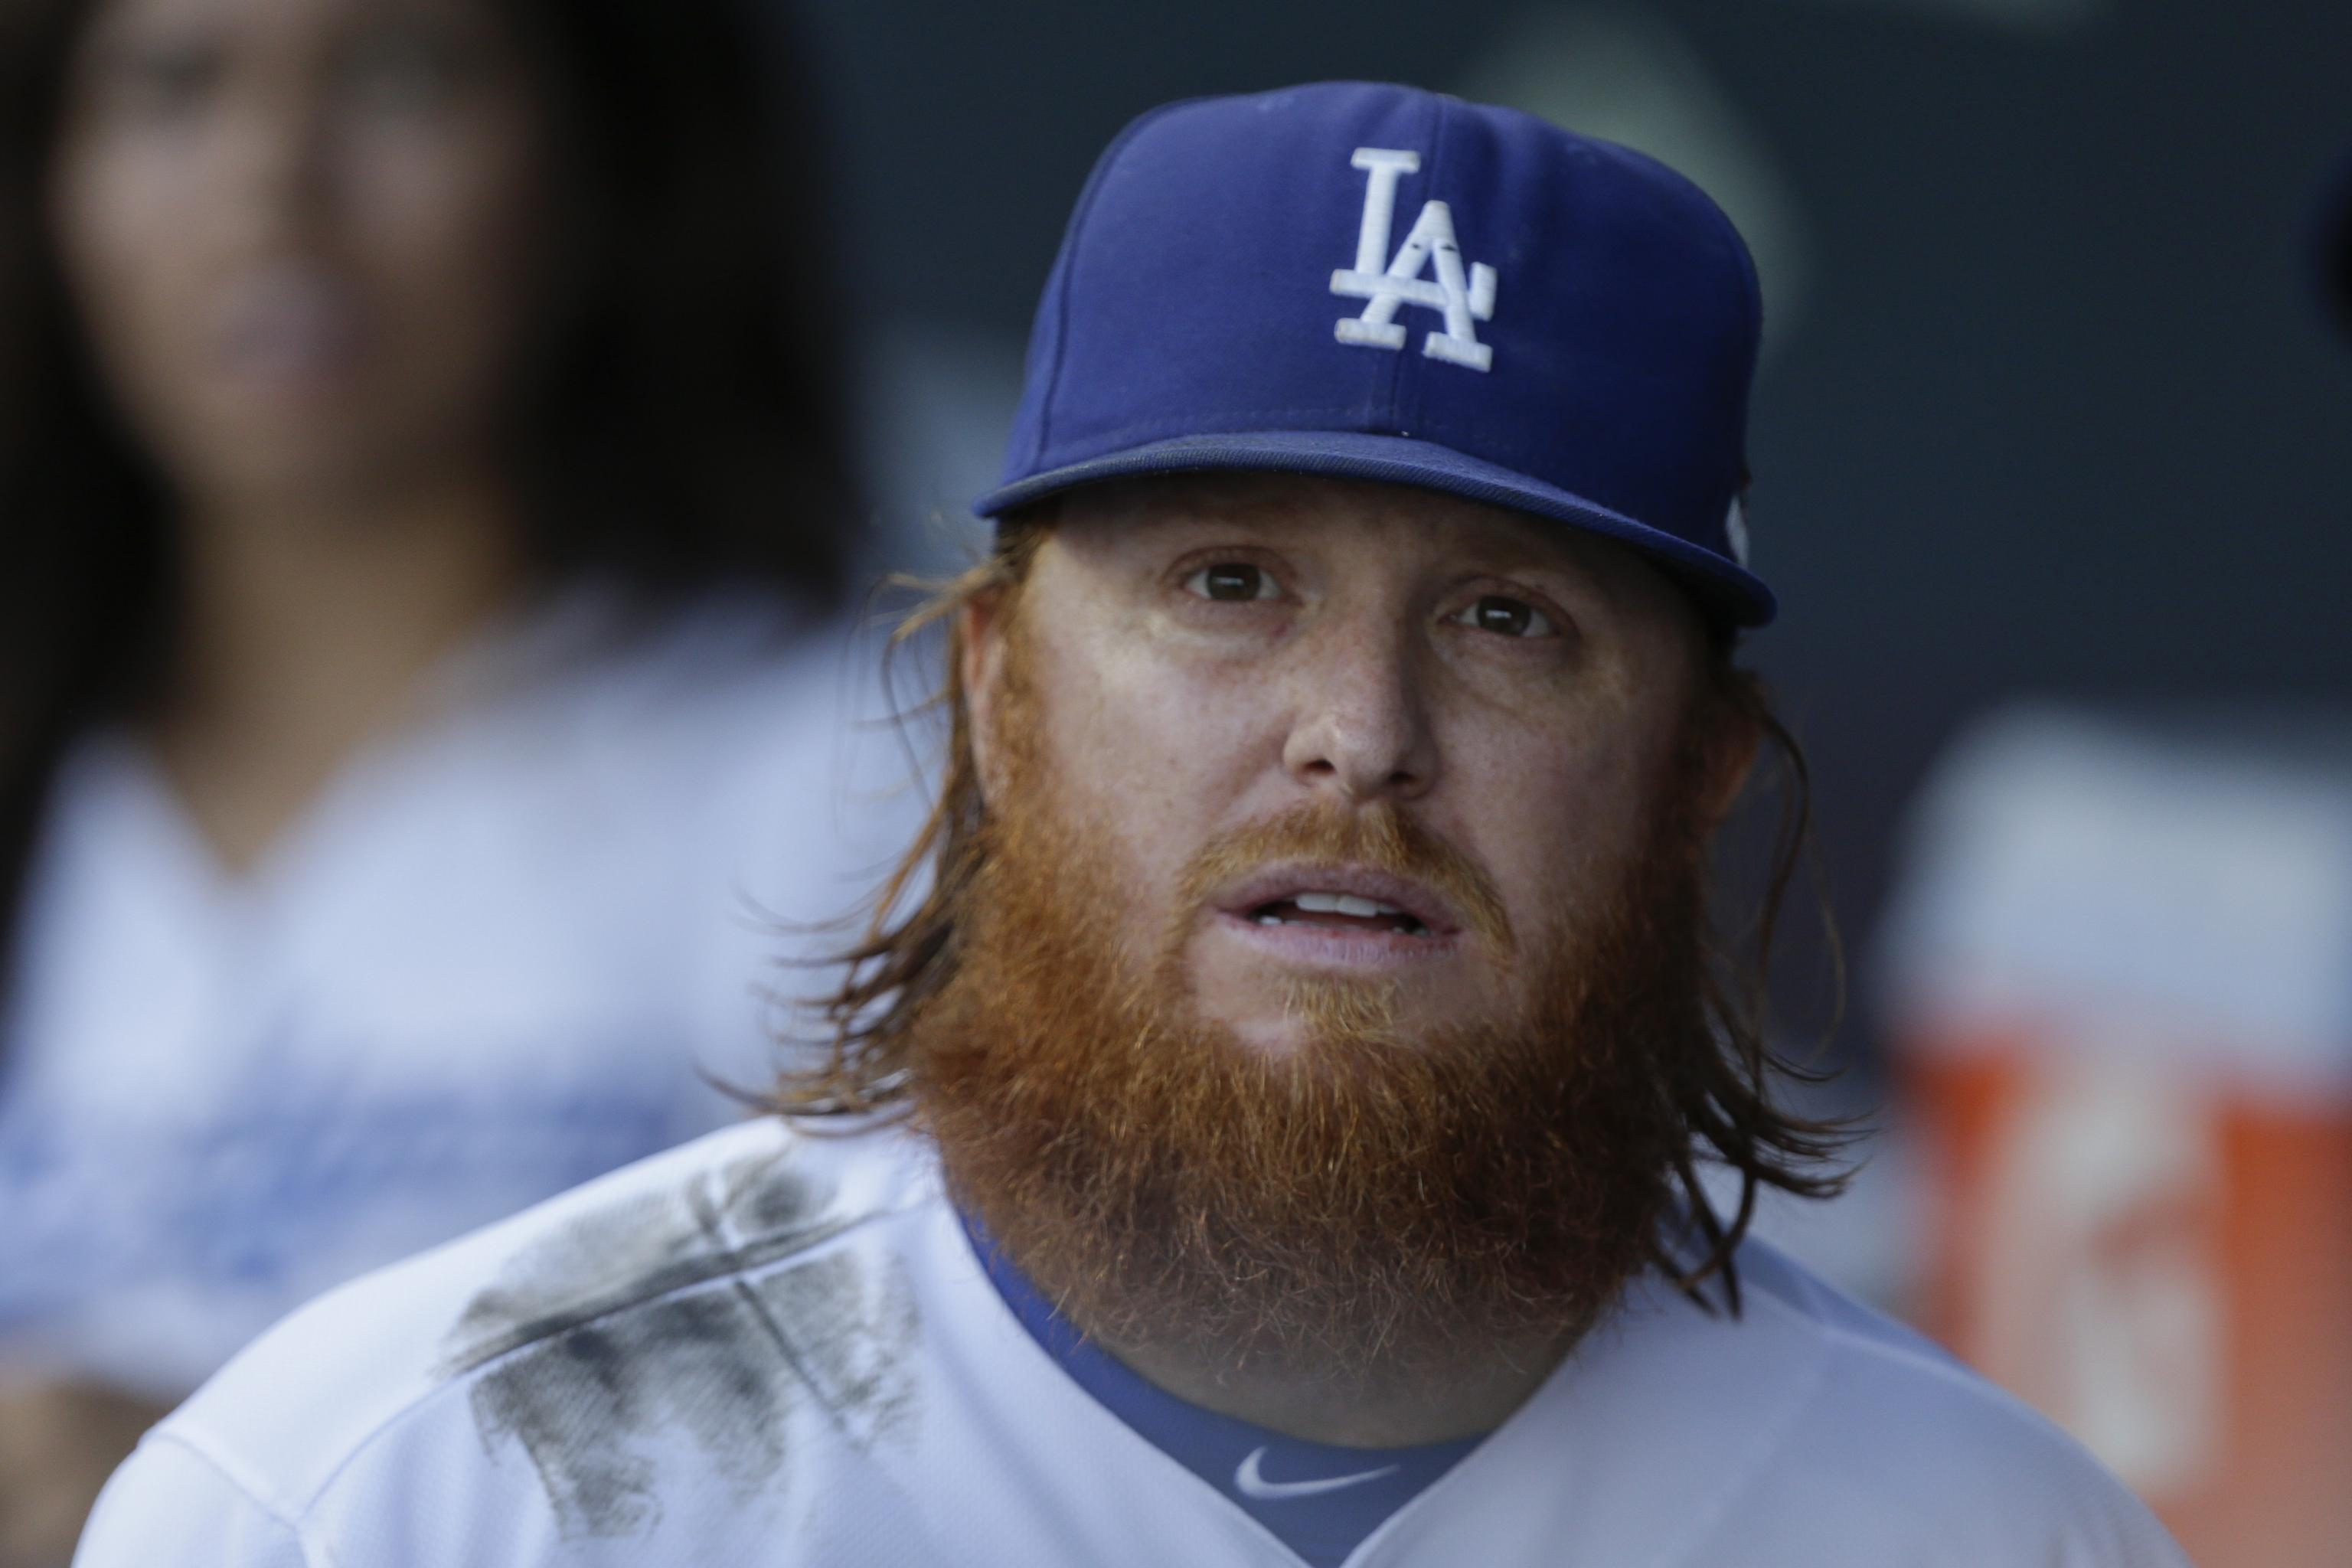 ⚠️😵 Justin Turner GRUESOME injury hit in face by pitch knocked to ground,  COMEBACK recovery‼️🙏 💪 